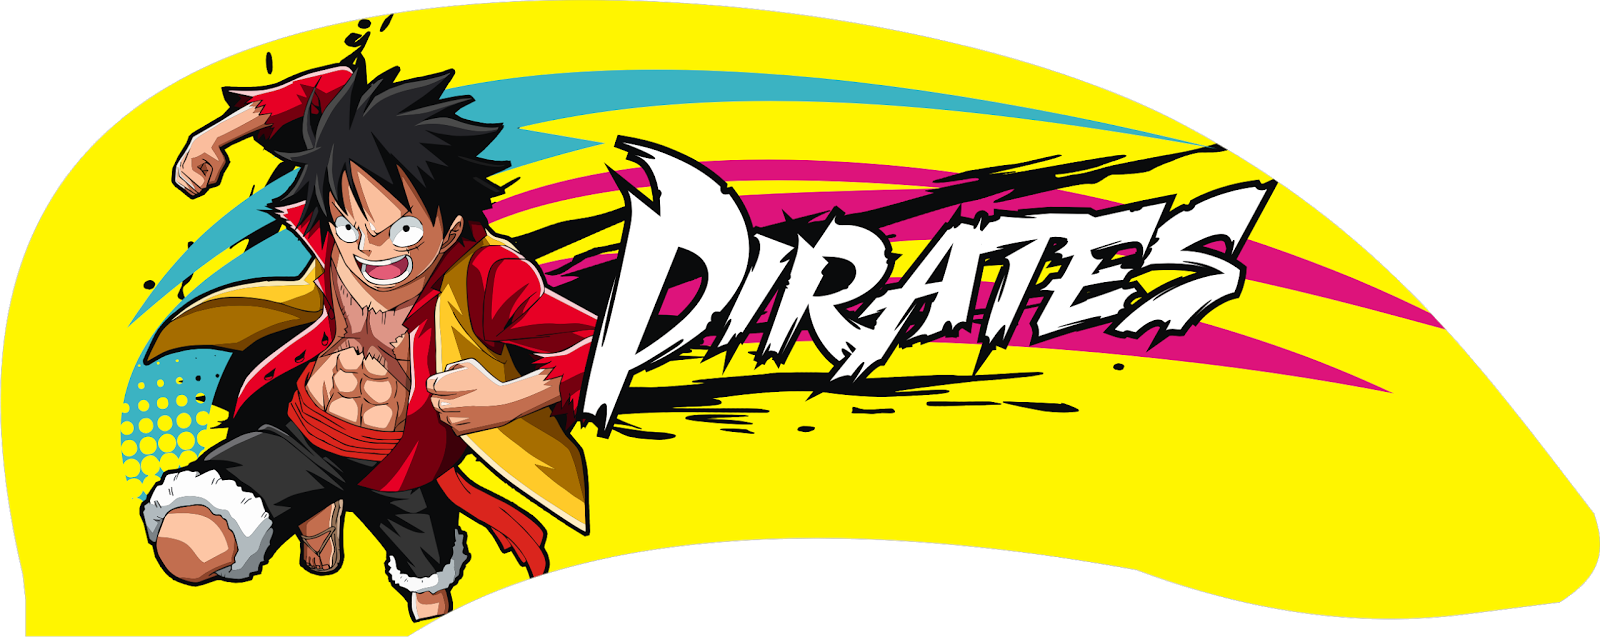 Download Monkey D Luffy Vector Cdr One Piece Hoodie Sweatshirt Monkey D Luffy Unisex Casual Png Image With No Background Pngkey Com